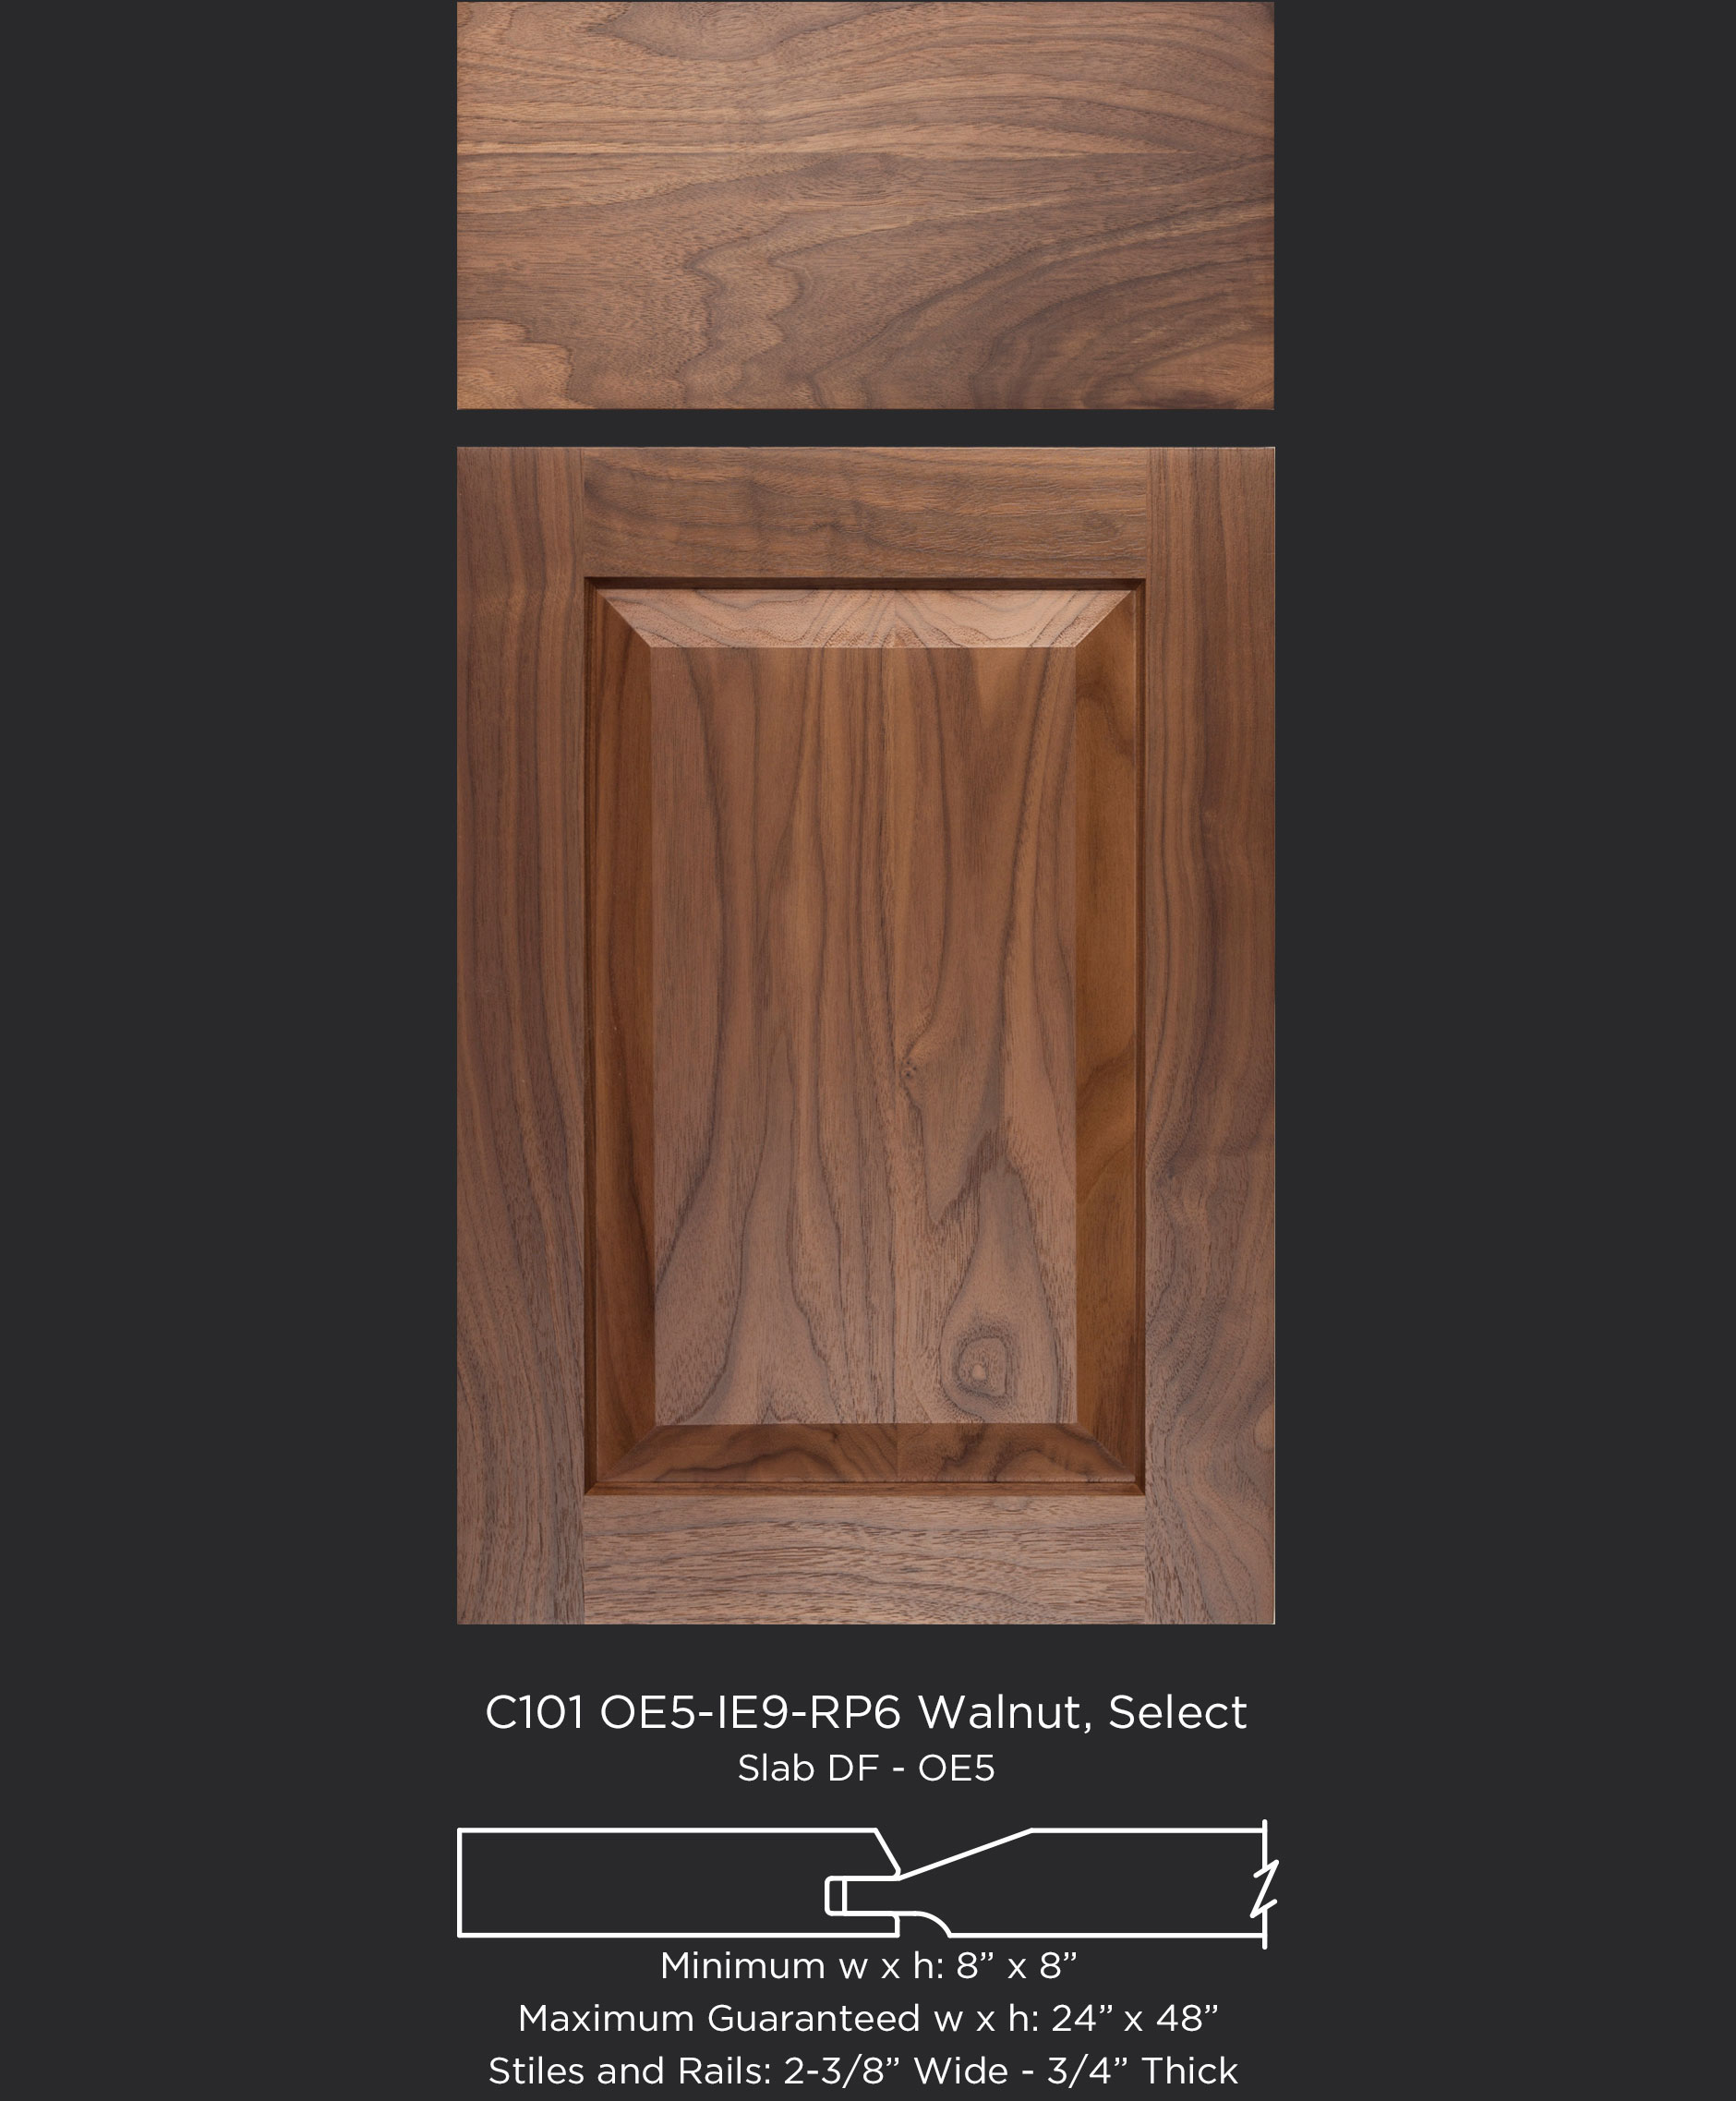 C101 Cope and Stick Cabinet Door OE5-IE9-RP6 Walnut, Select with slab drawer front